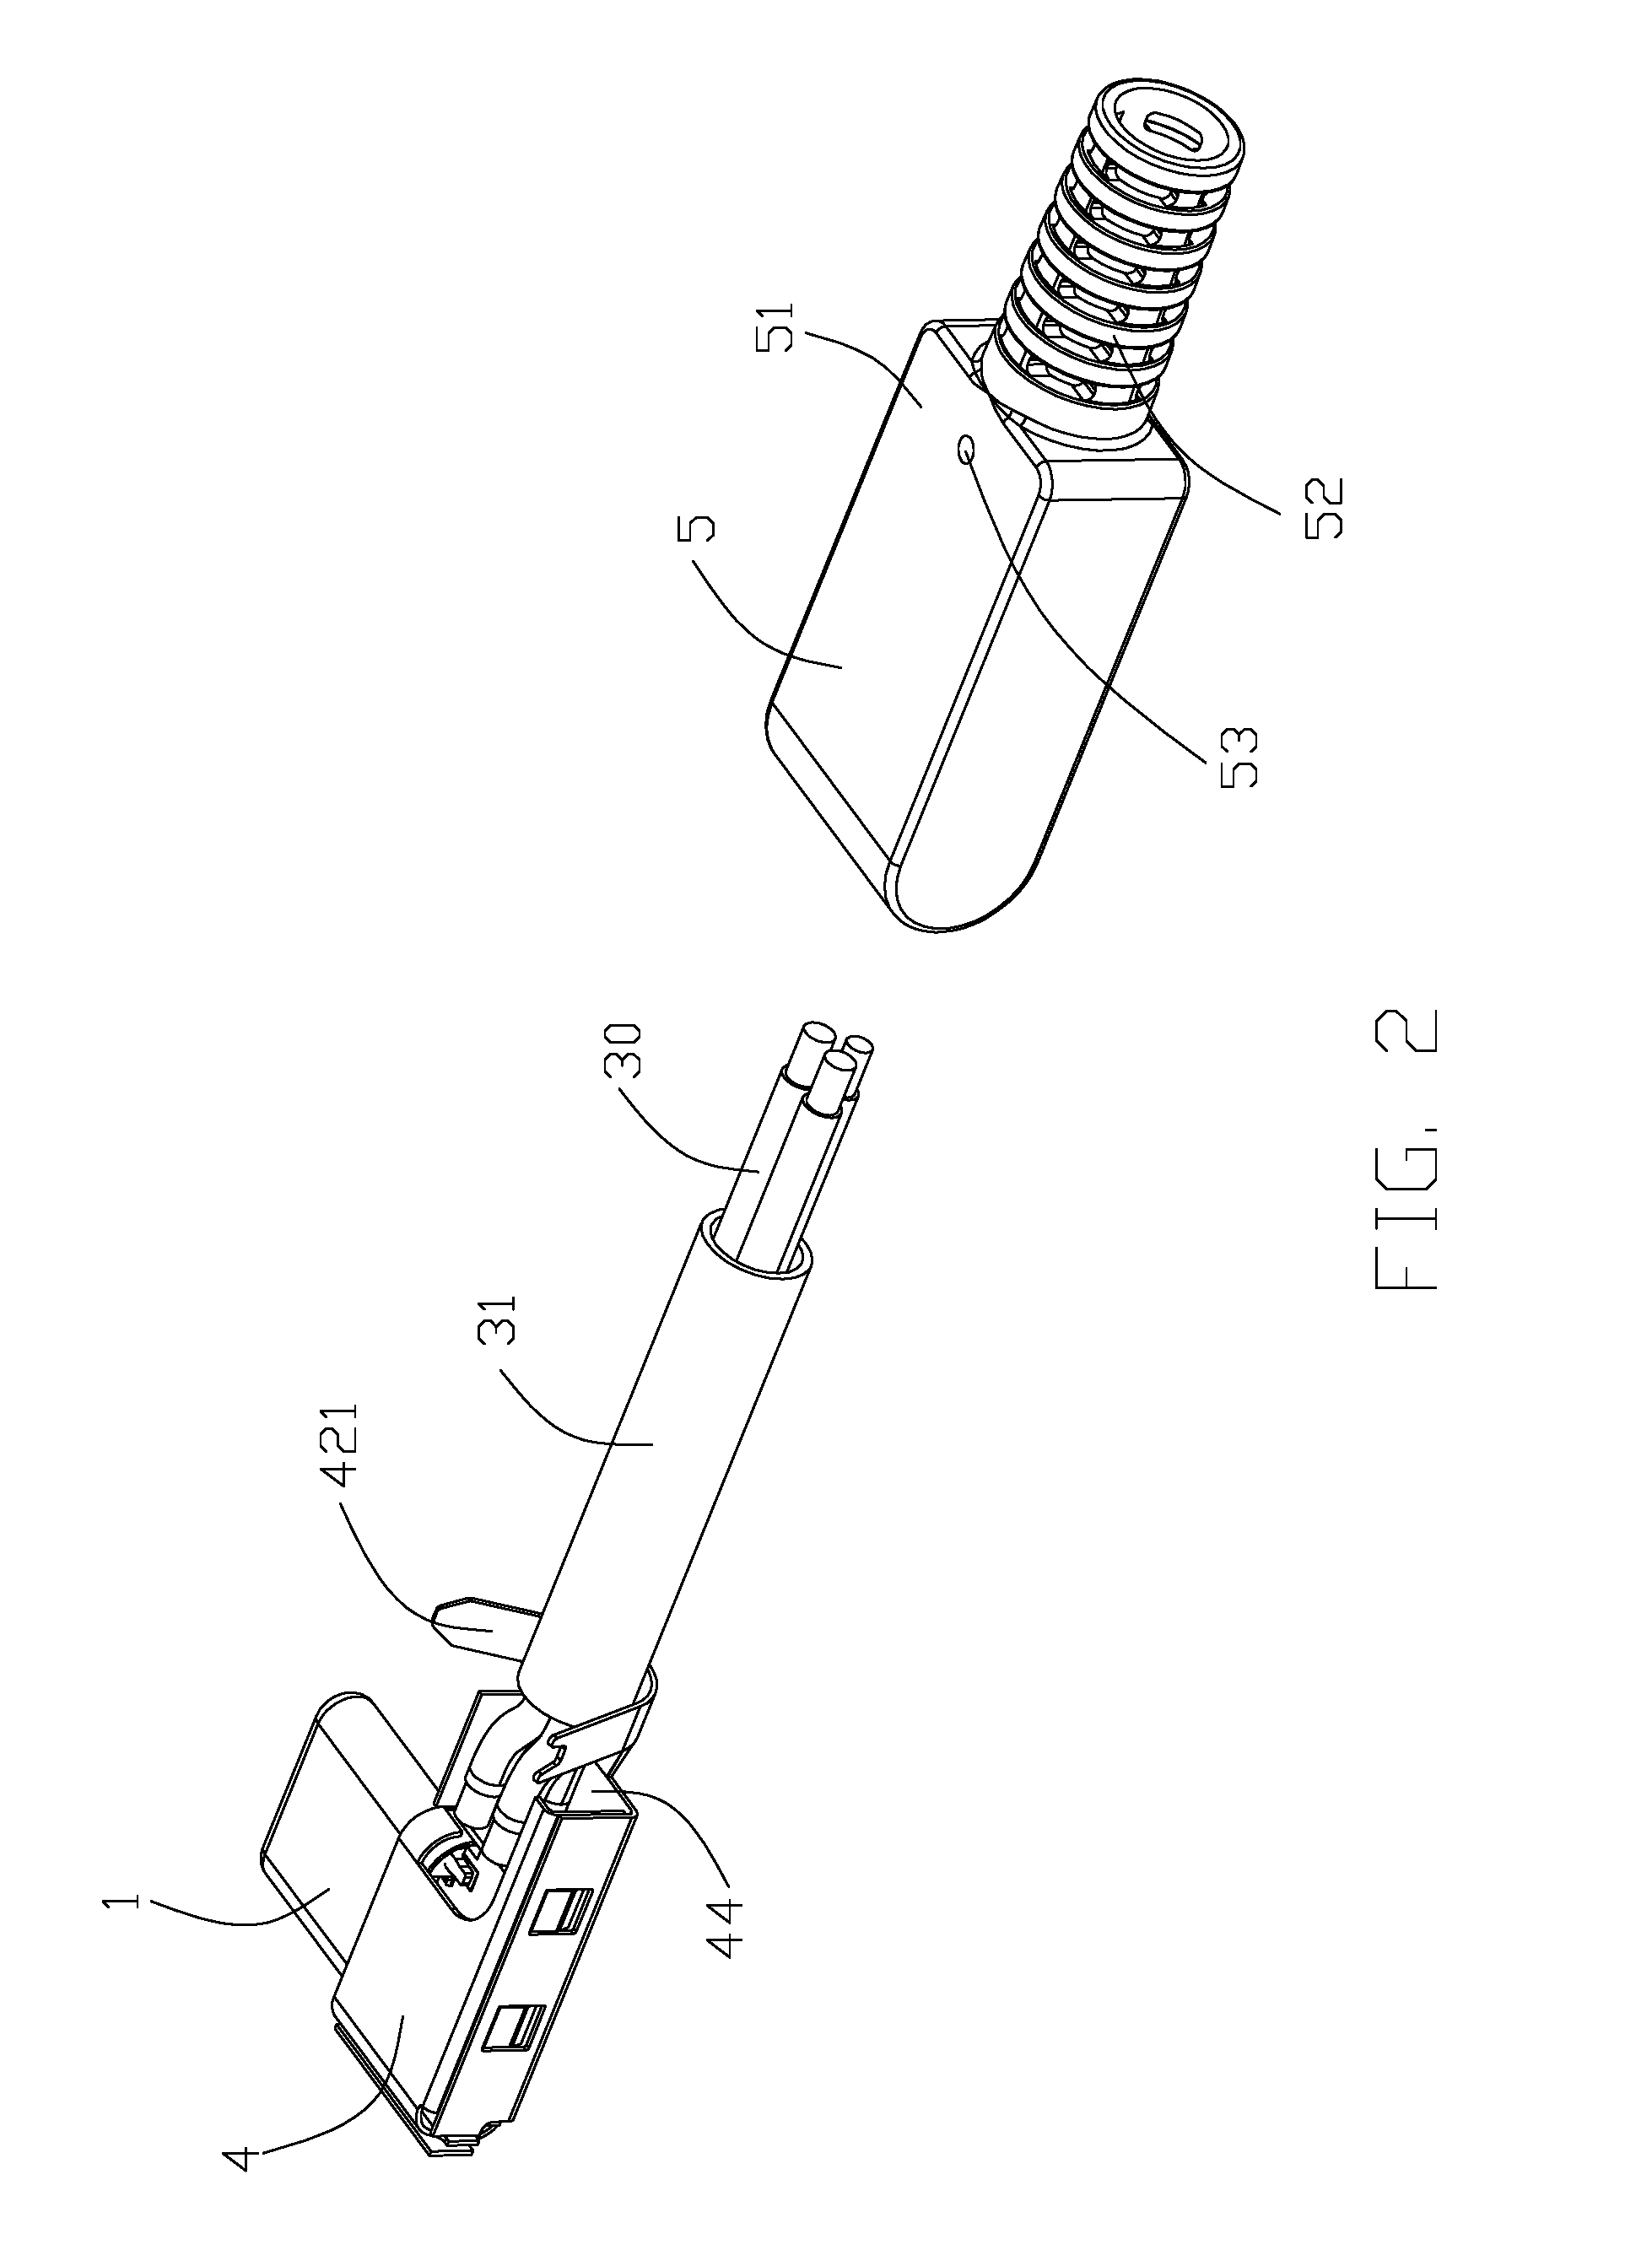 Cable connector assembly having improved metal shell